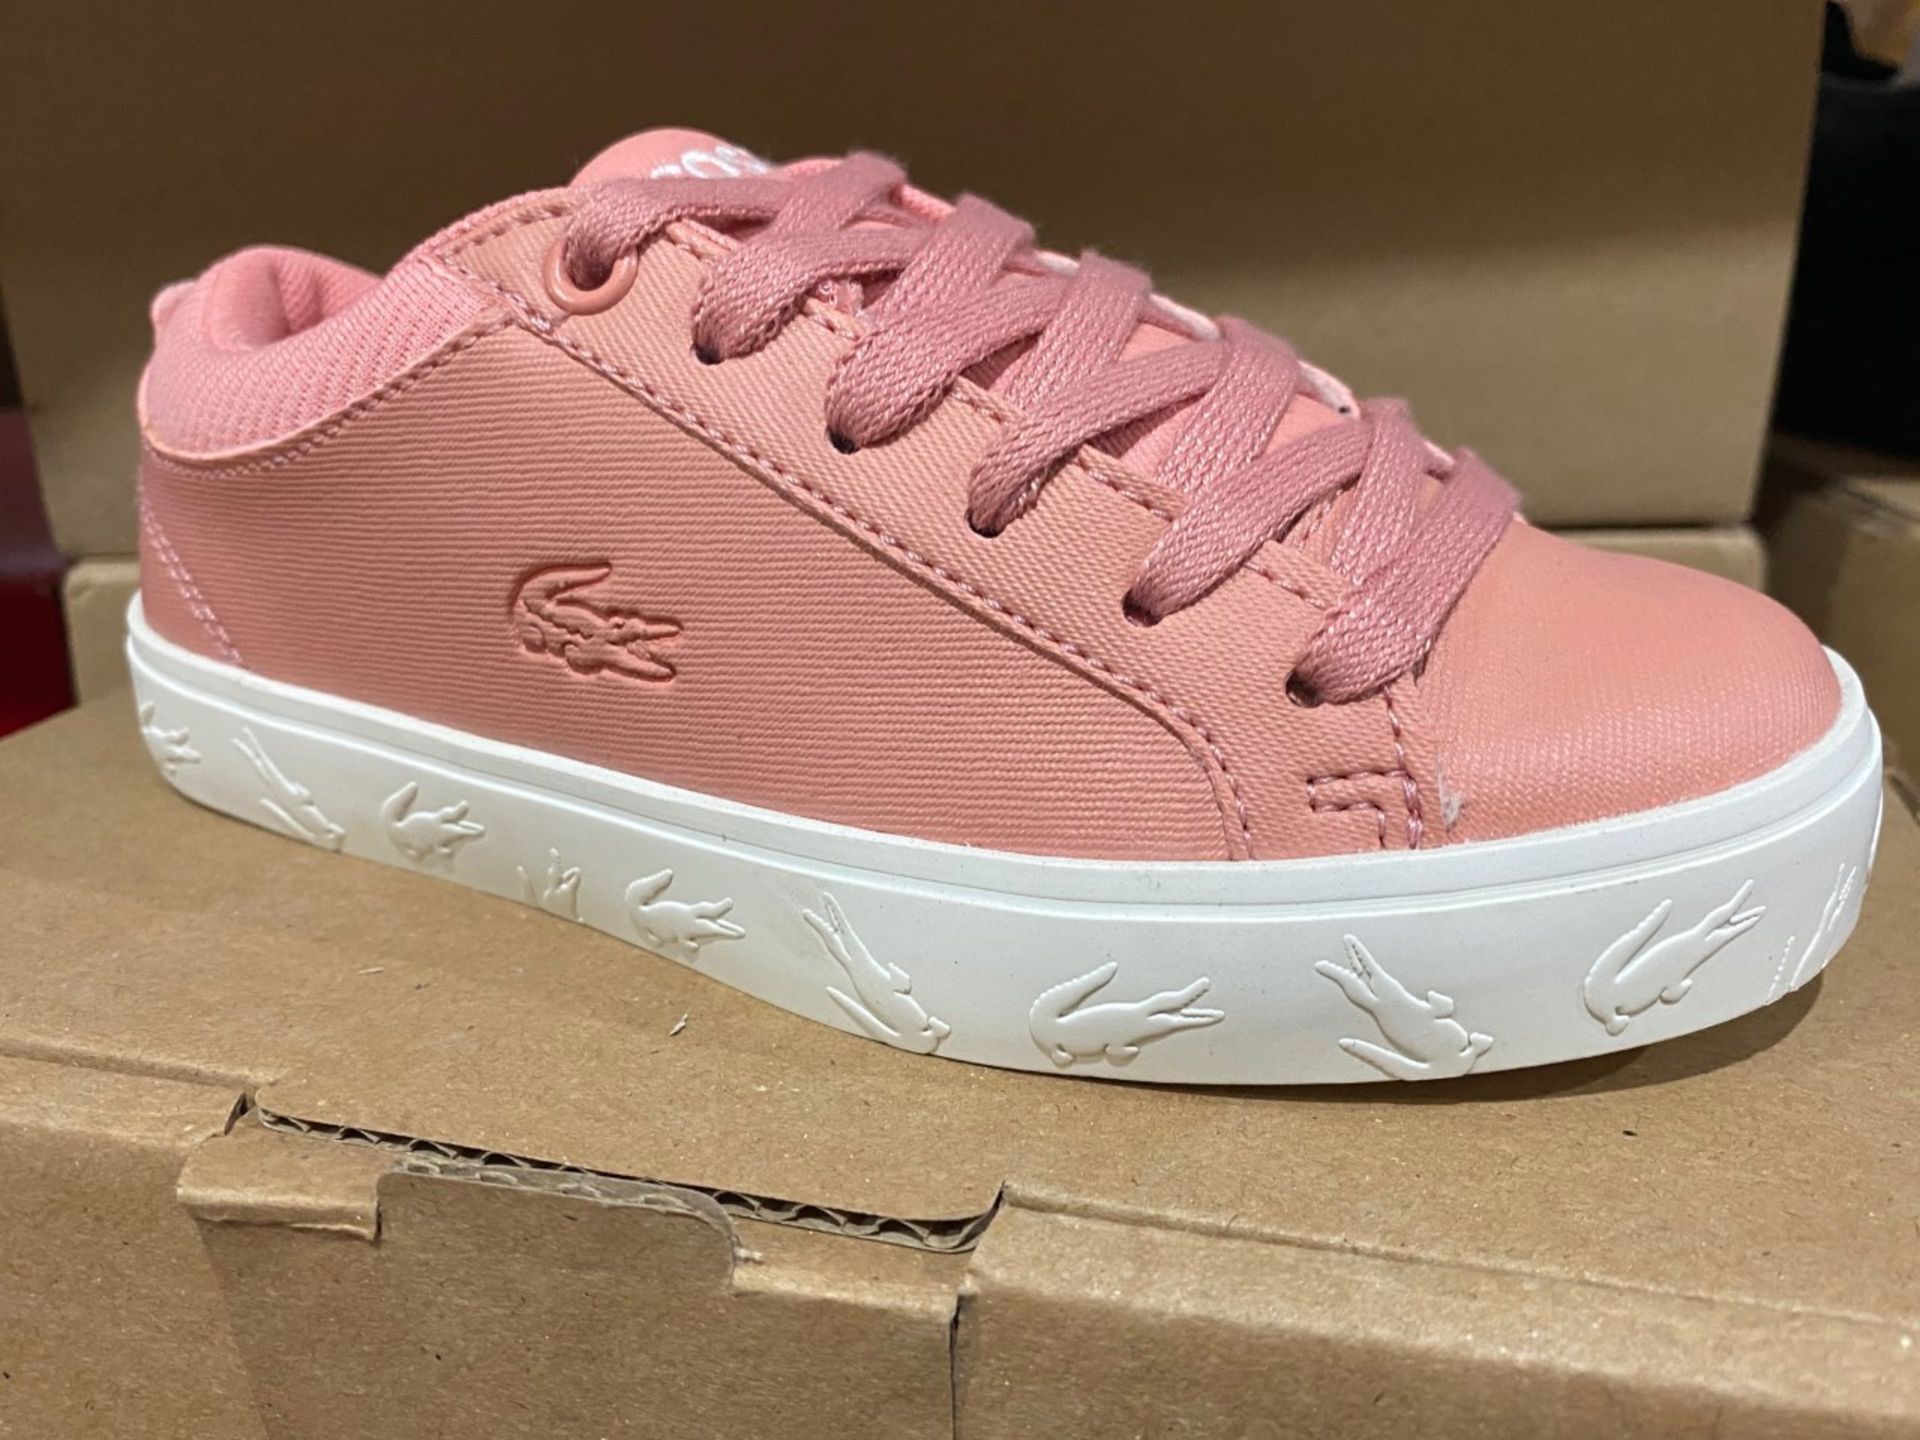 NEW & BOXED LACOSTE PINK LOGO TRAINER SIZE INFANT 10